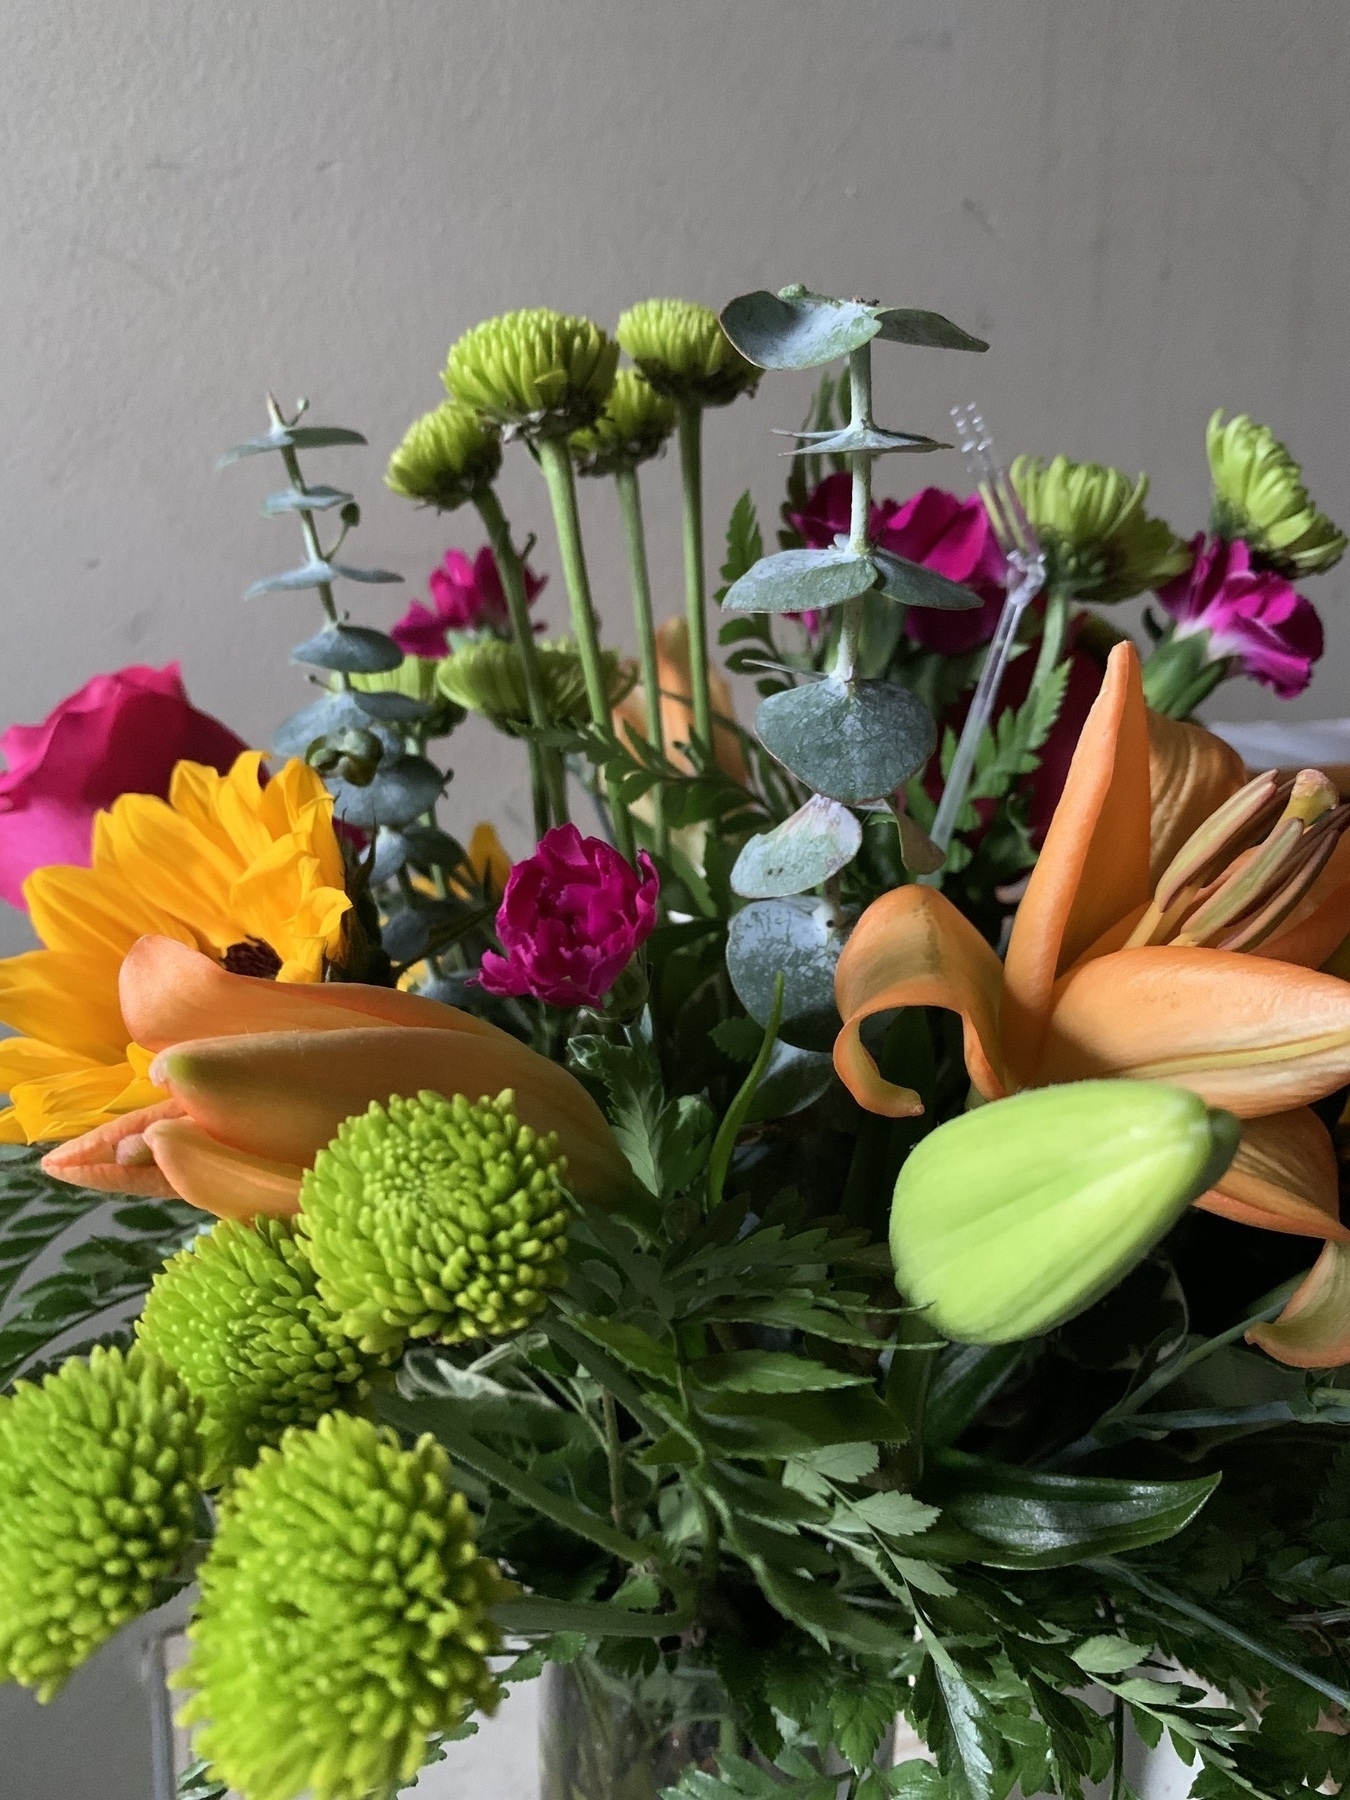 A bouquet of assorted flowers, including at least one sunflower, a rose, a few lilies and several other blooms to be named later, as delivered Tuesday, May 16, 2023 to a certain household somewhere on the Eastern Seaboard.